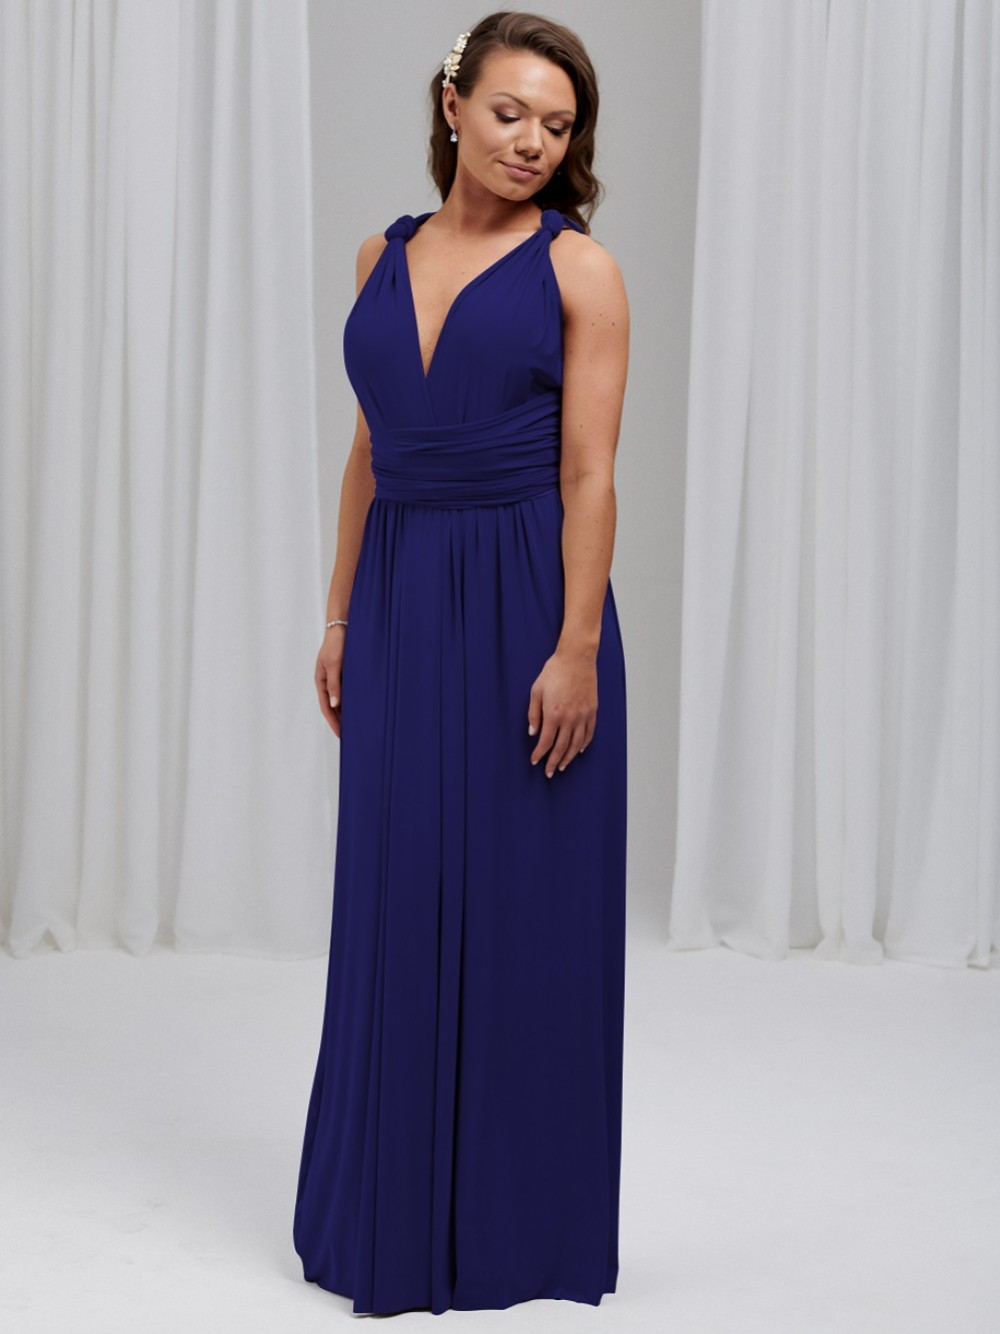 Photograph: Emily Rose Royal Blue Multiway Bridesmaid Dress (One Size)